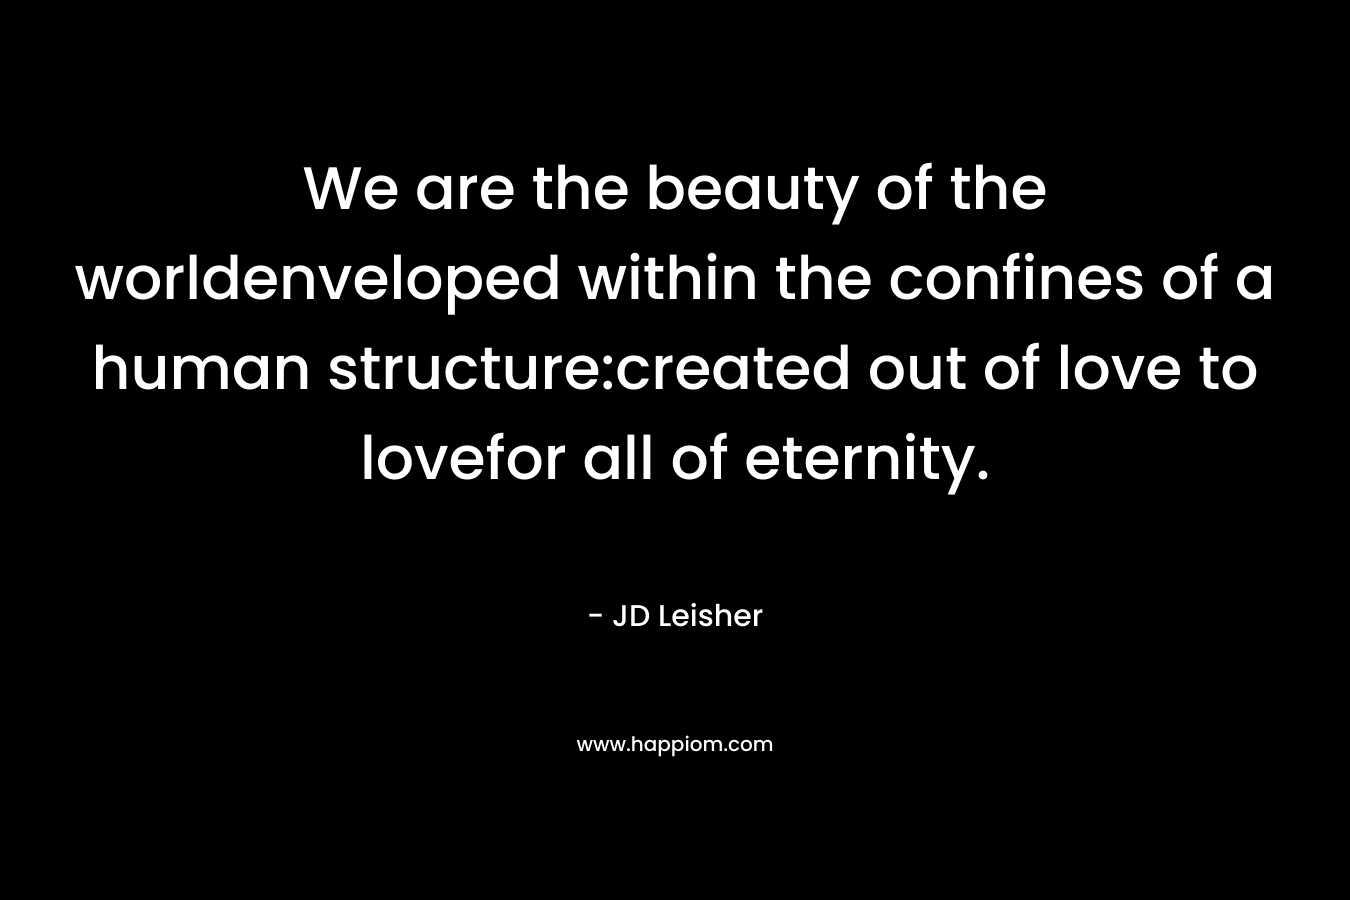 We are the beauty of the worldenveloped within the confines of a human structure:created out of love to lovefor all of eternity. – JD Leisher